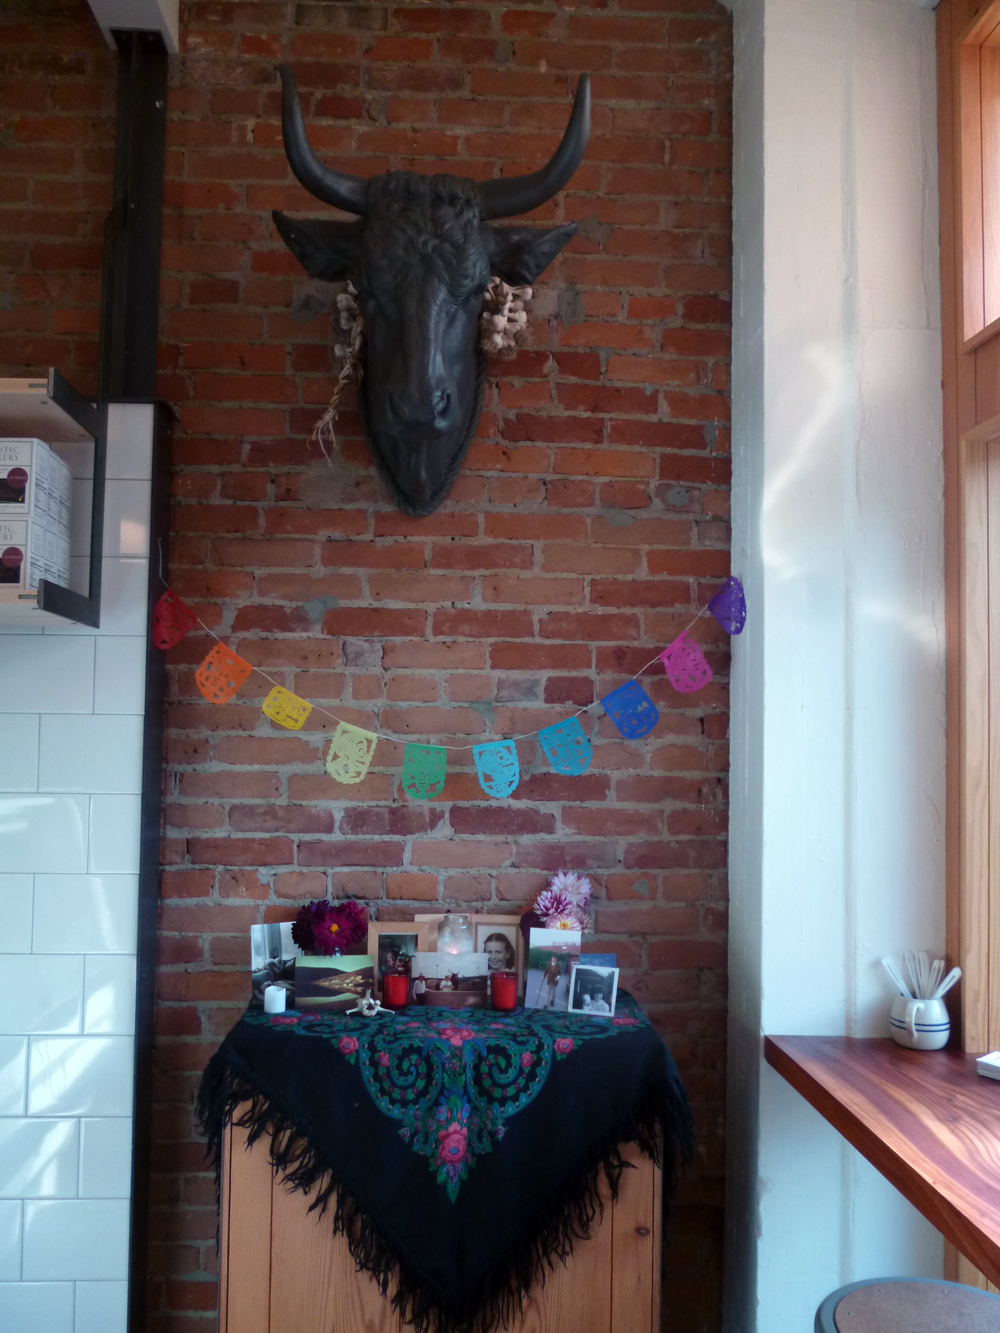 Day of the Dead display with bull head sculpture by David Best, father of Thistle Meats owner Molly Best.